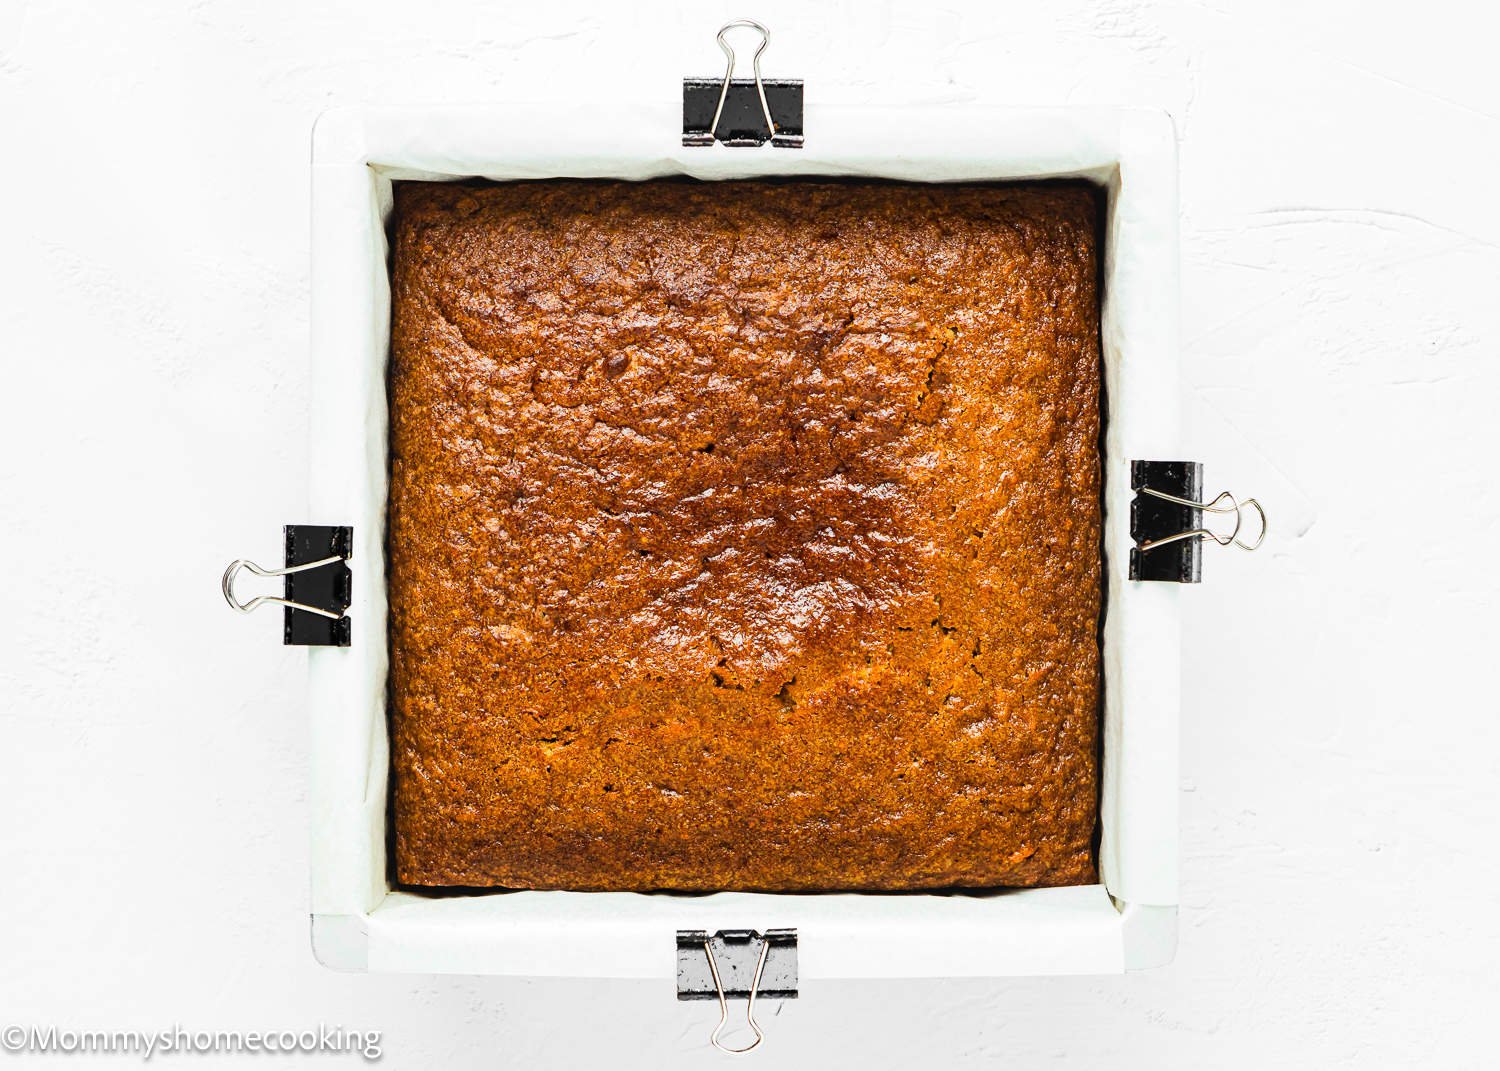 a bake small Easy Carrot Cake Cake in a baking pan.